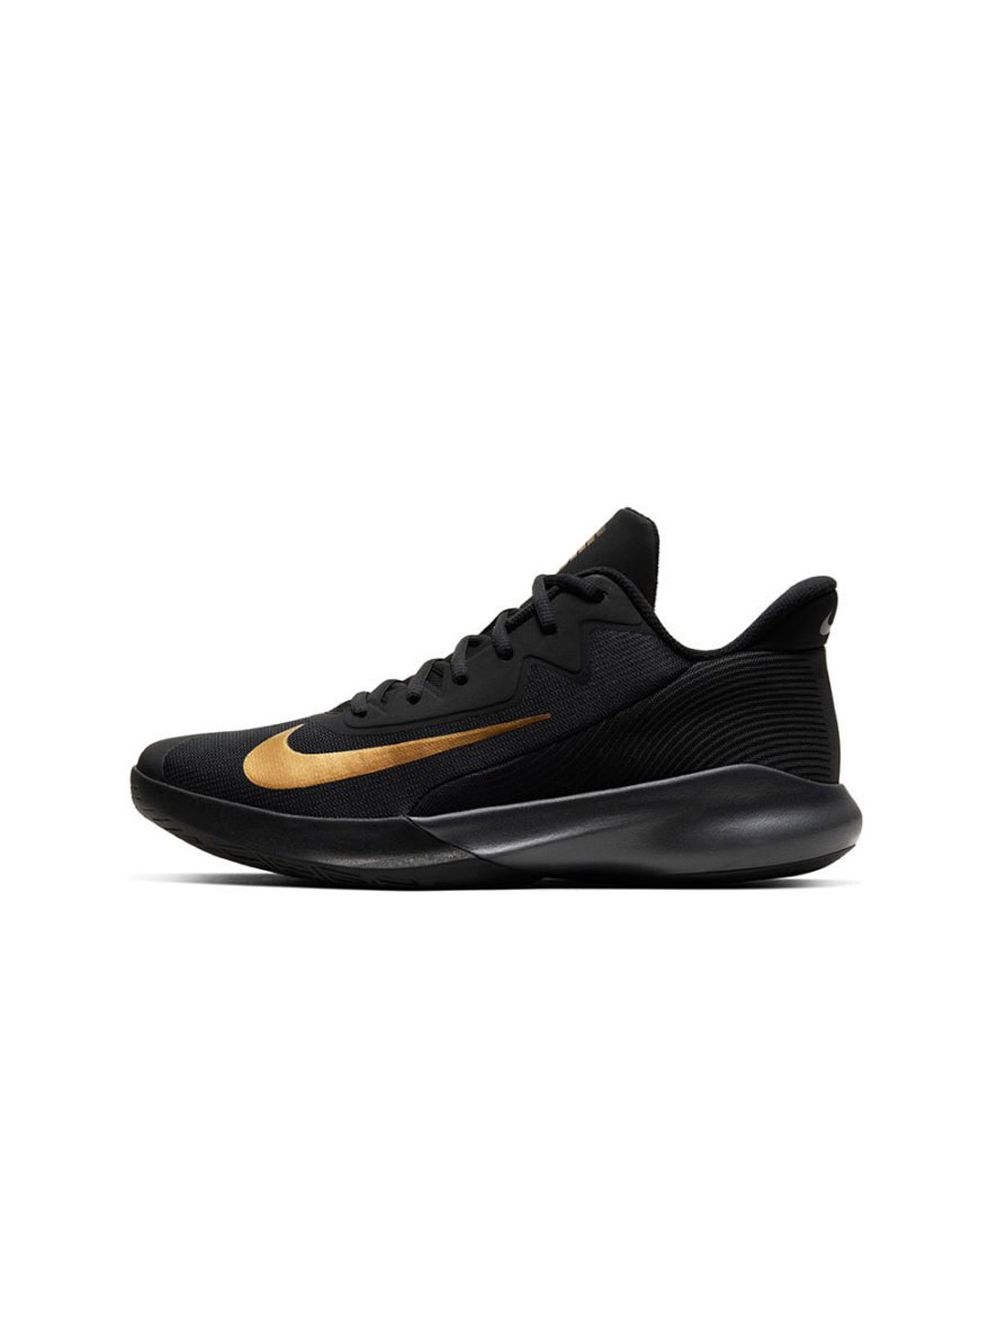 black and gold nike shoes